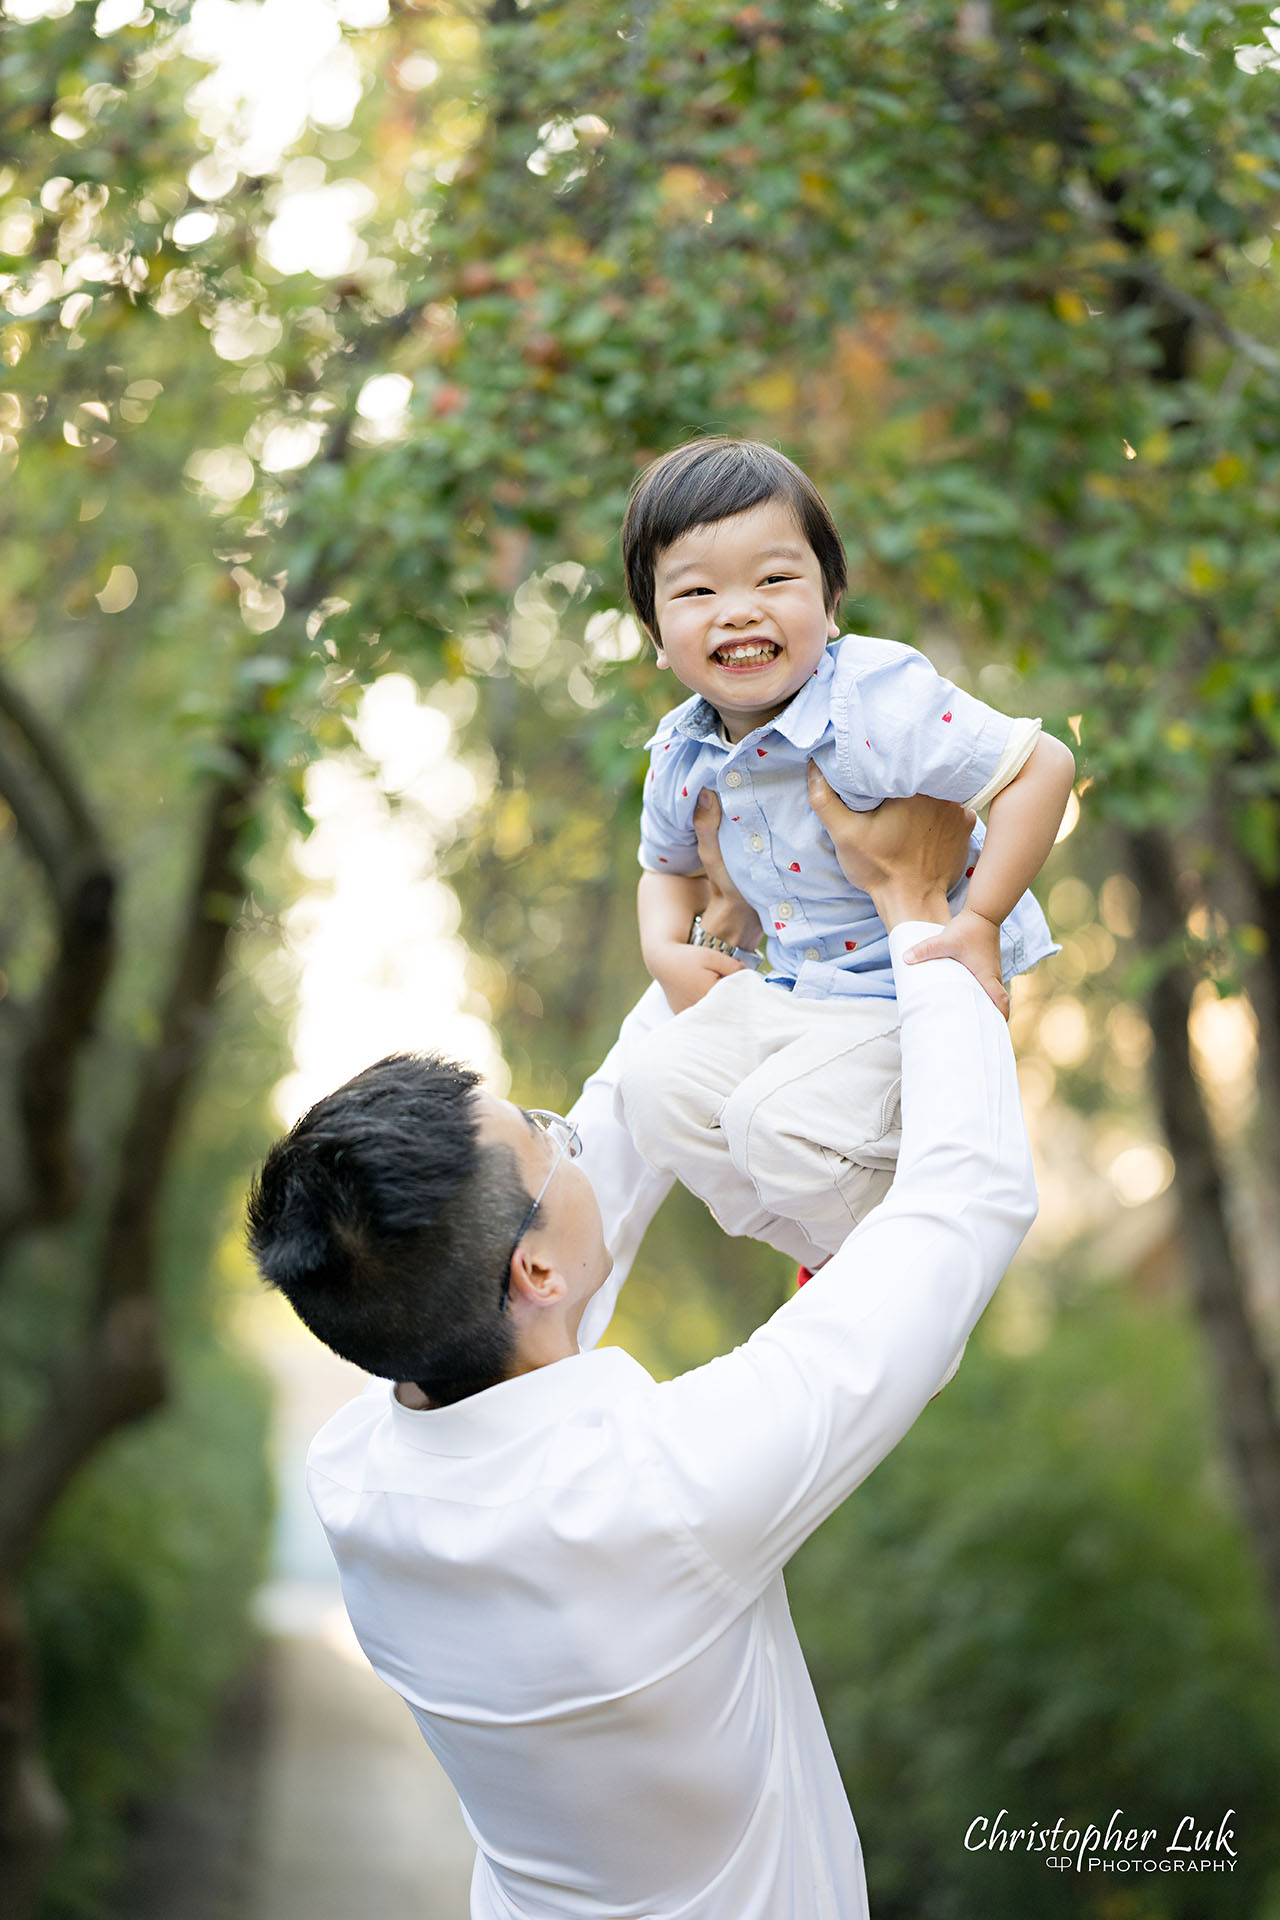 Christopher Luk Markham Family Photographer Photojournalistic Candid Natural Organic Father Son Fun Laughing Play Flying Portrait